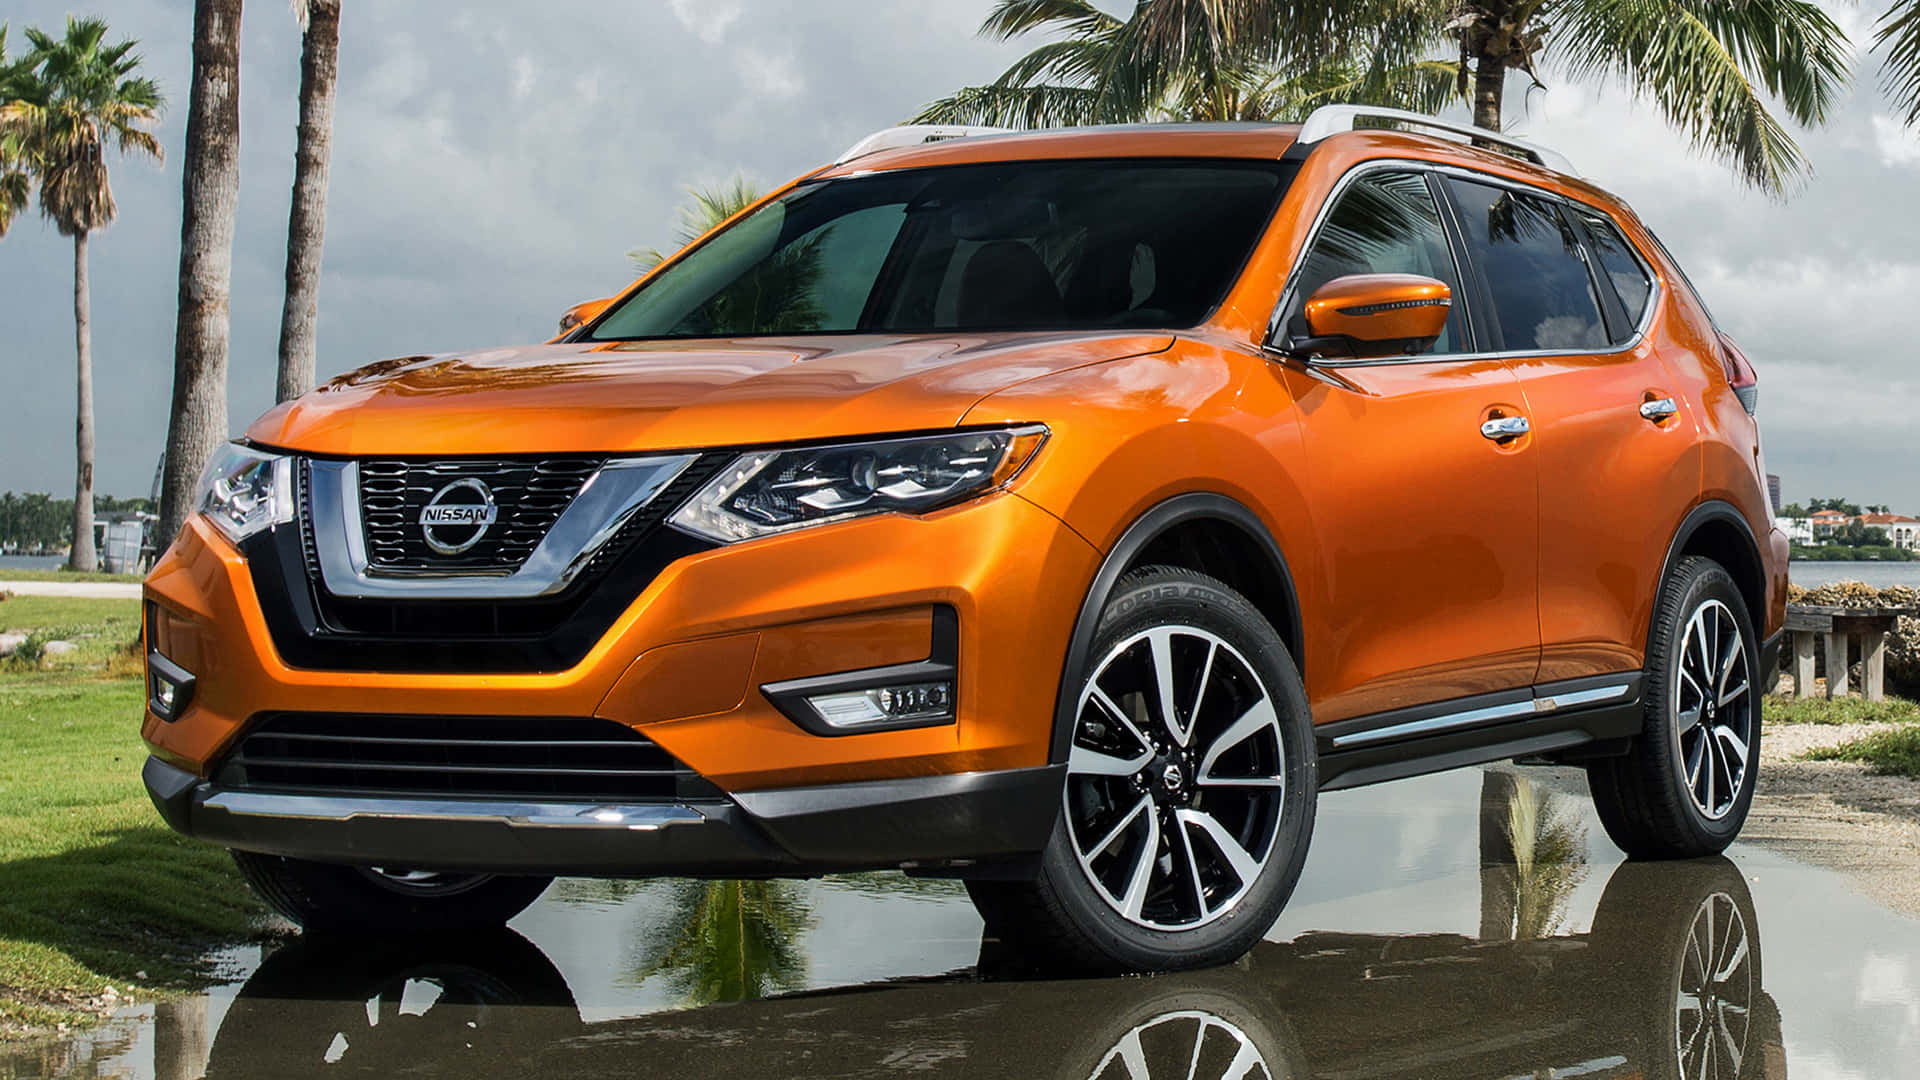 Caption: Nissan Rogue - Bold And Robust Wallpaper